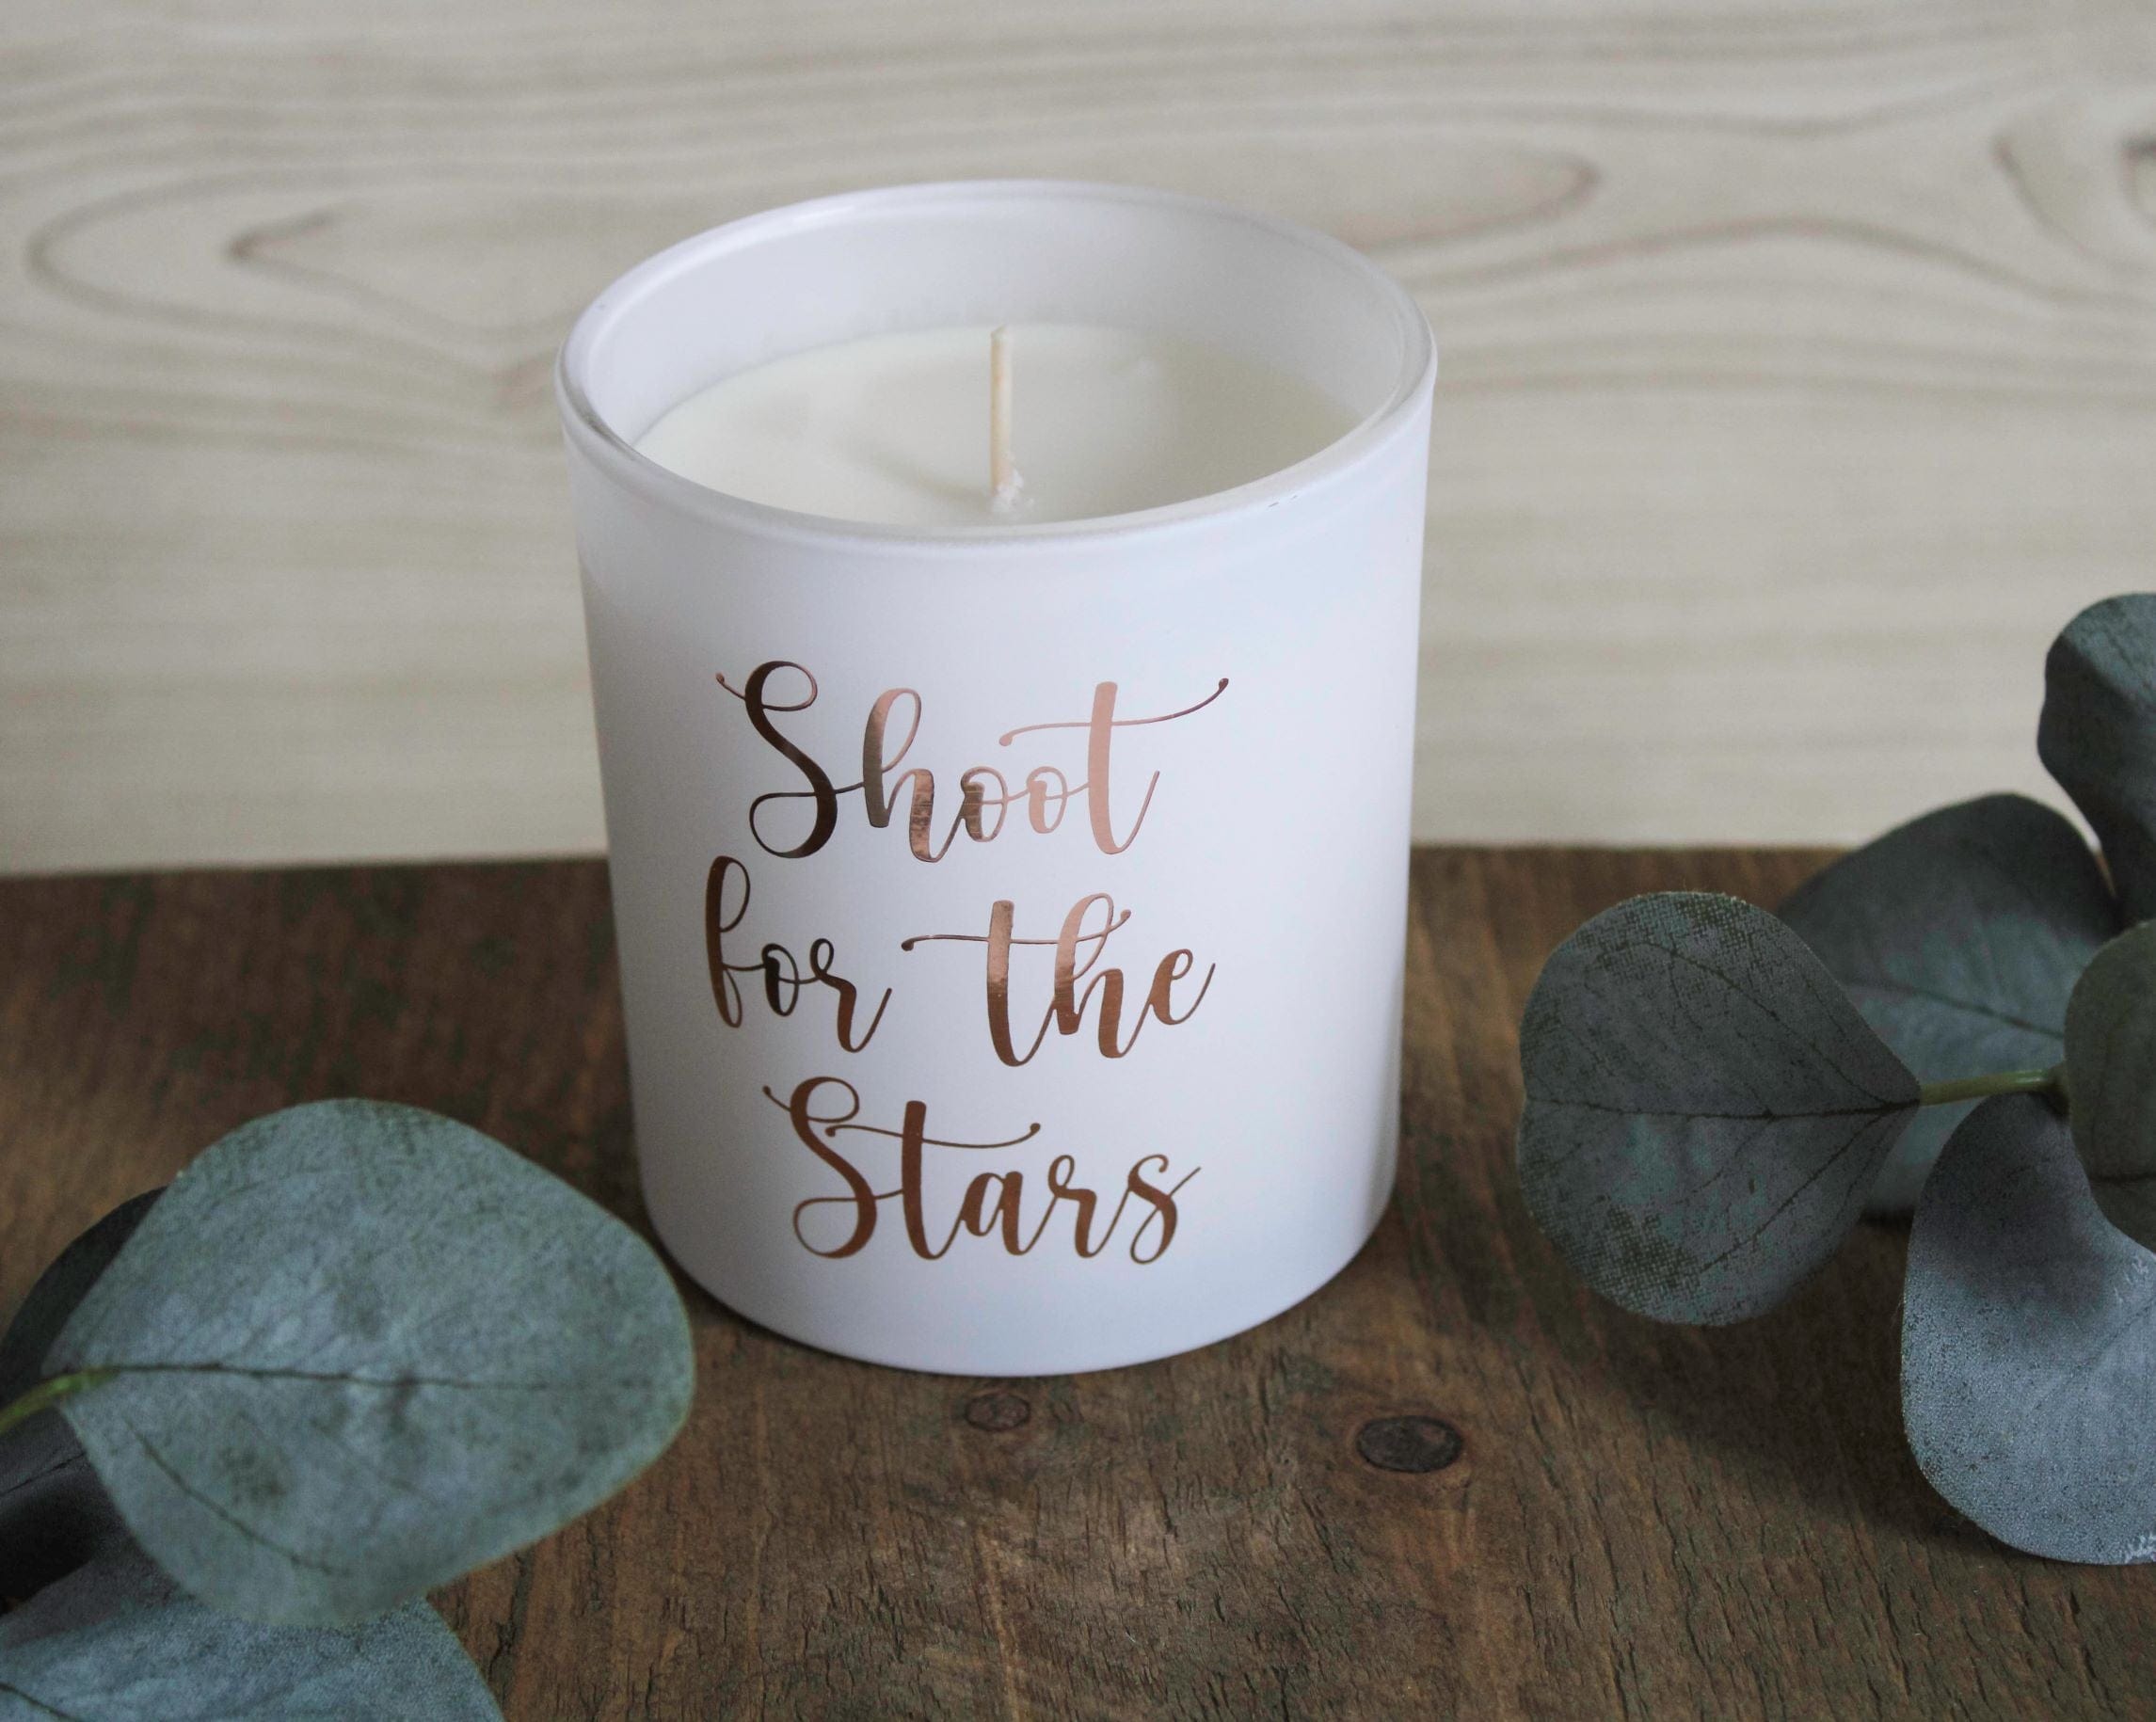 Shoot for the Stars: Soy InnerVoice Candle